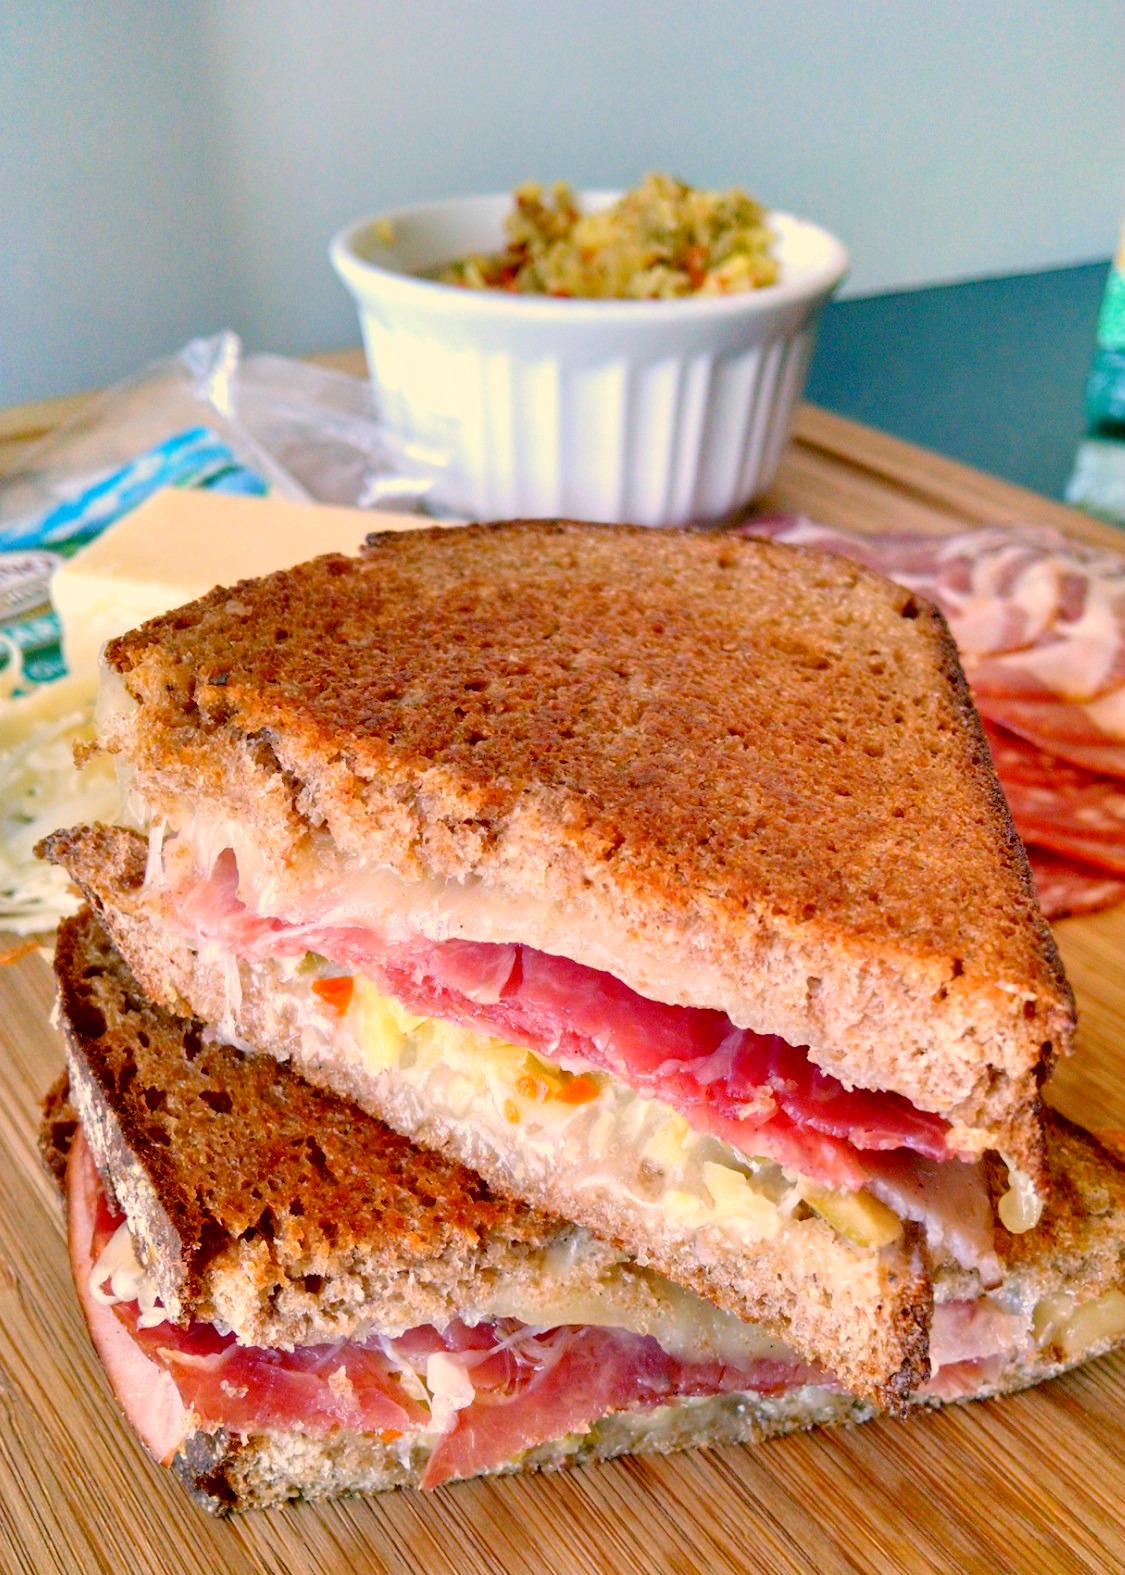 With all the flavors of a traditional Muffaletta sandwich, this Muffaletta Grilled Cheese using Rumiano Cheese is a delicious and family friendly version of the New Orleans tradition 'wich.